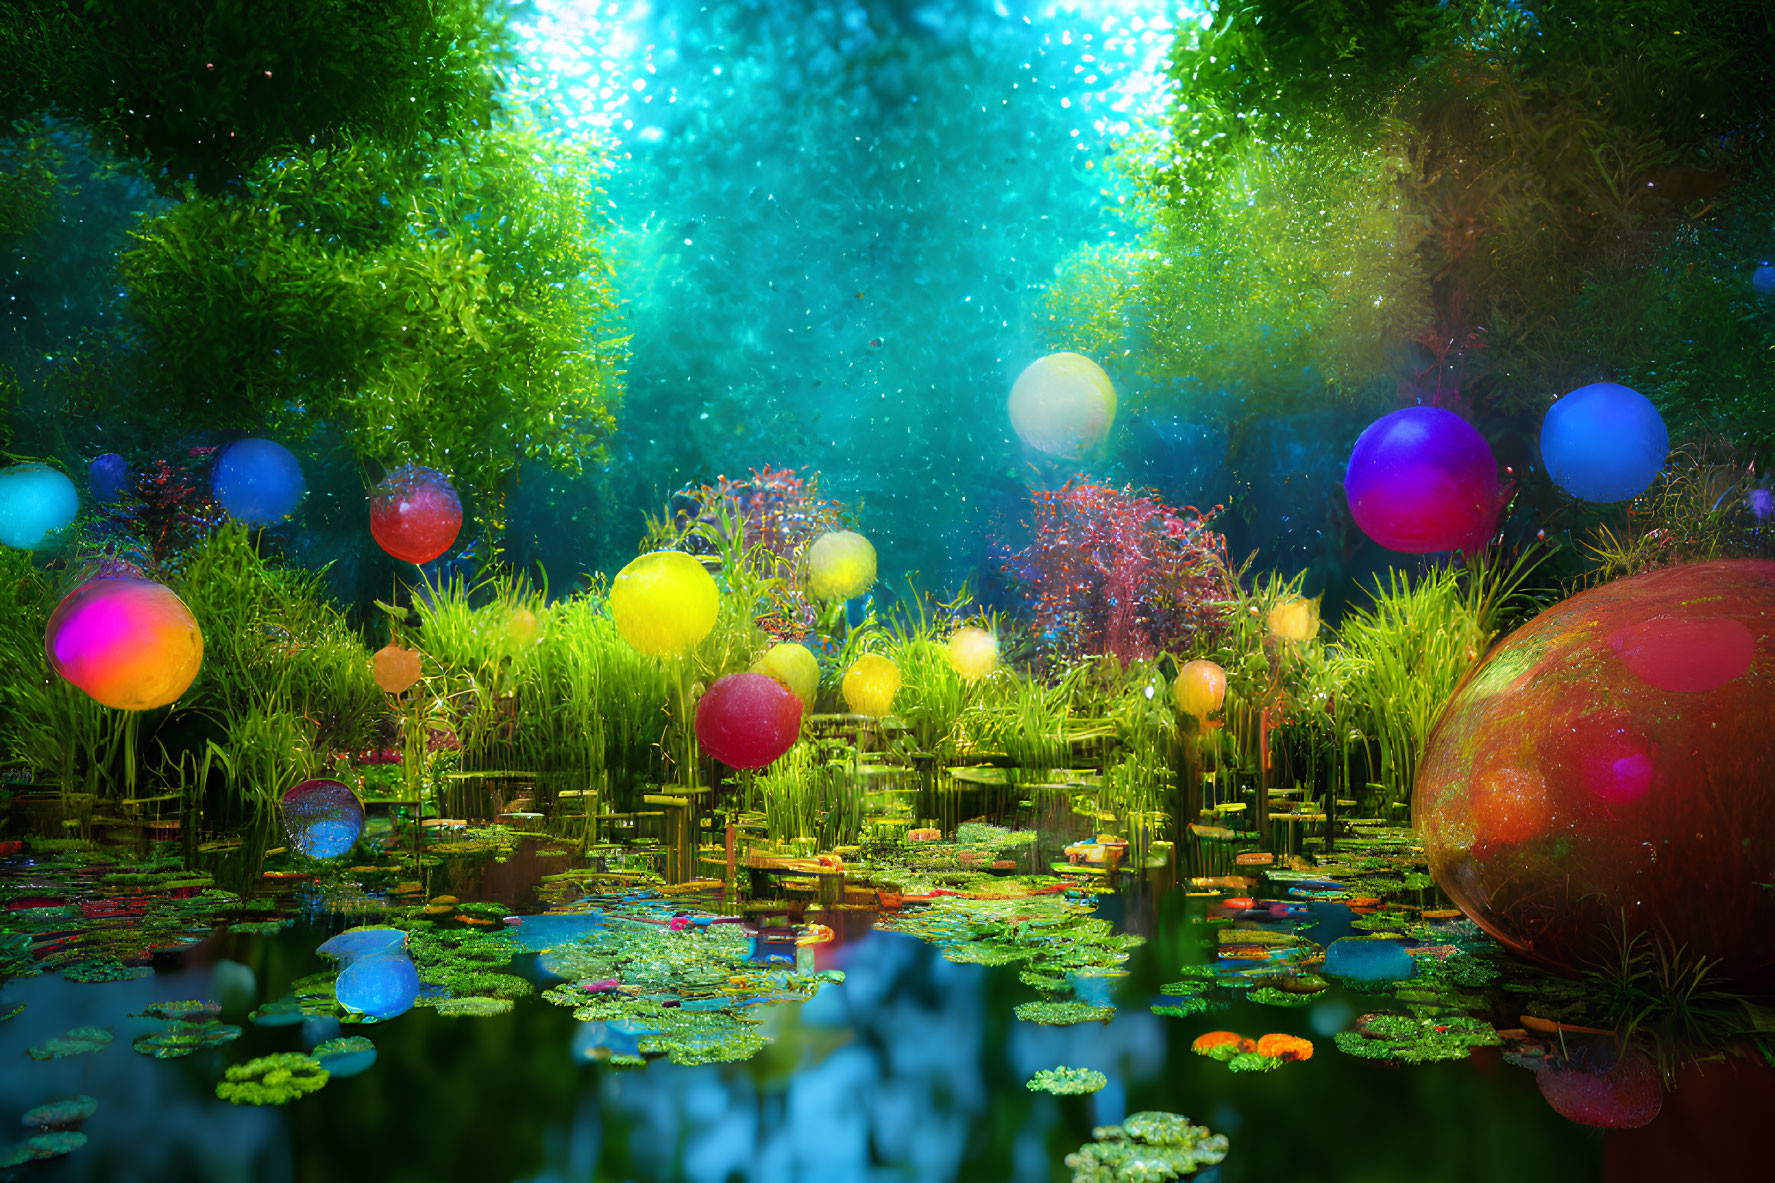 Colorful Glowing Orbs Above Water Lilies in Magical Pond